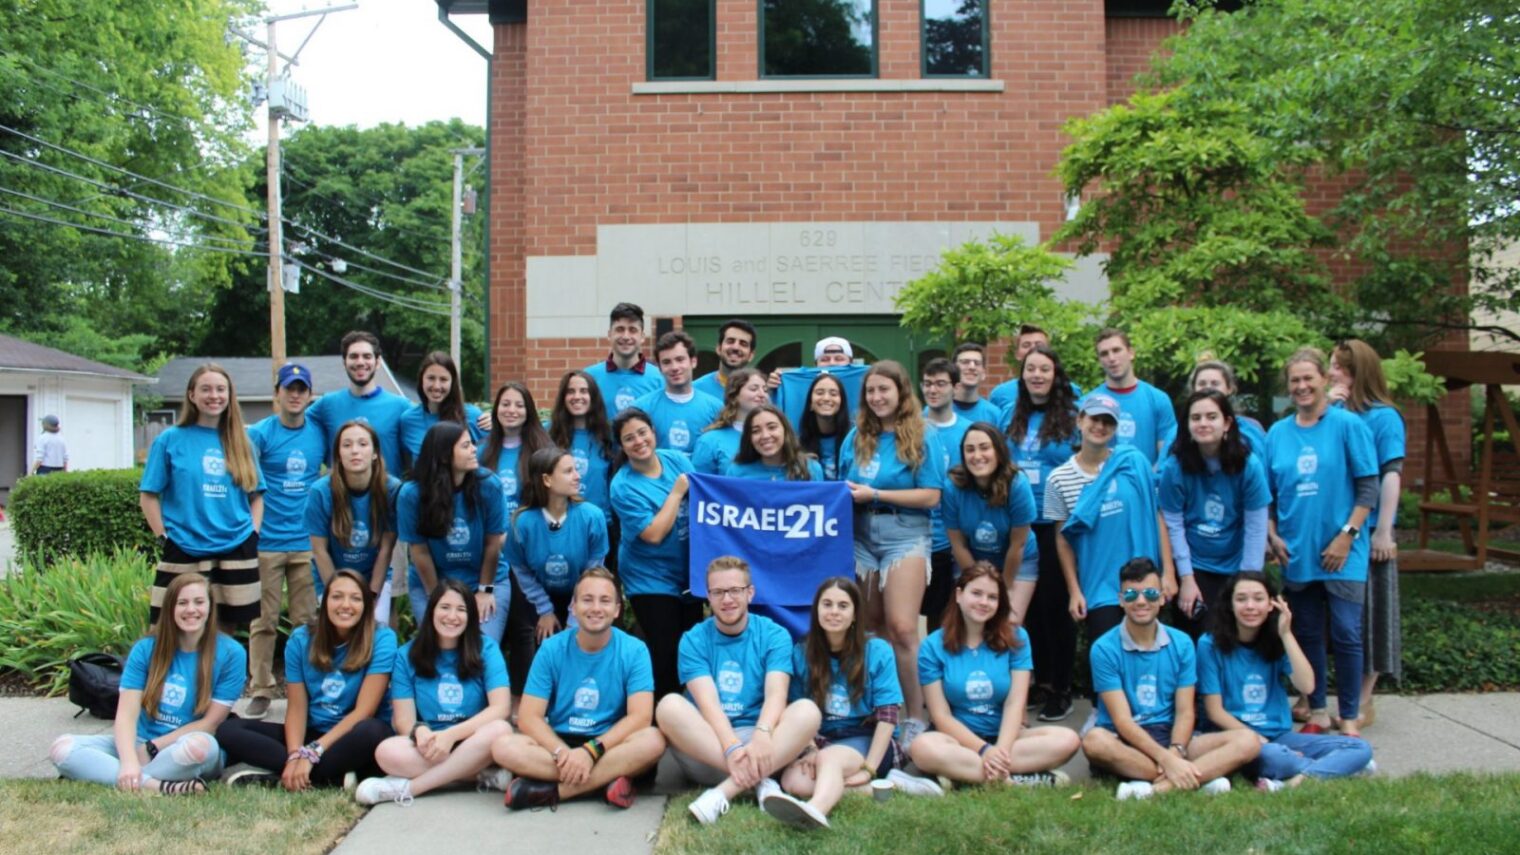 Students from 30 different campuses took part in the Digital Ambassador Retreat in Evanston. Photo by Nicky Blackburn